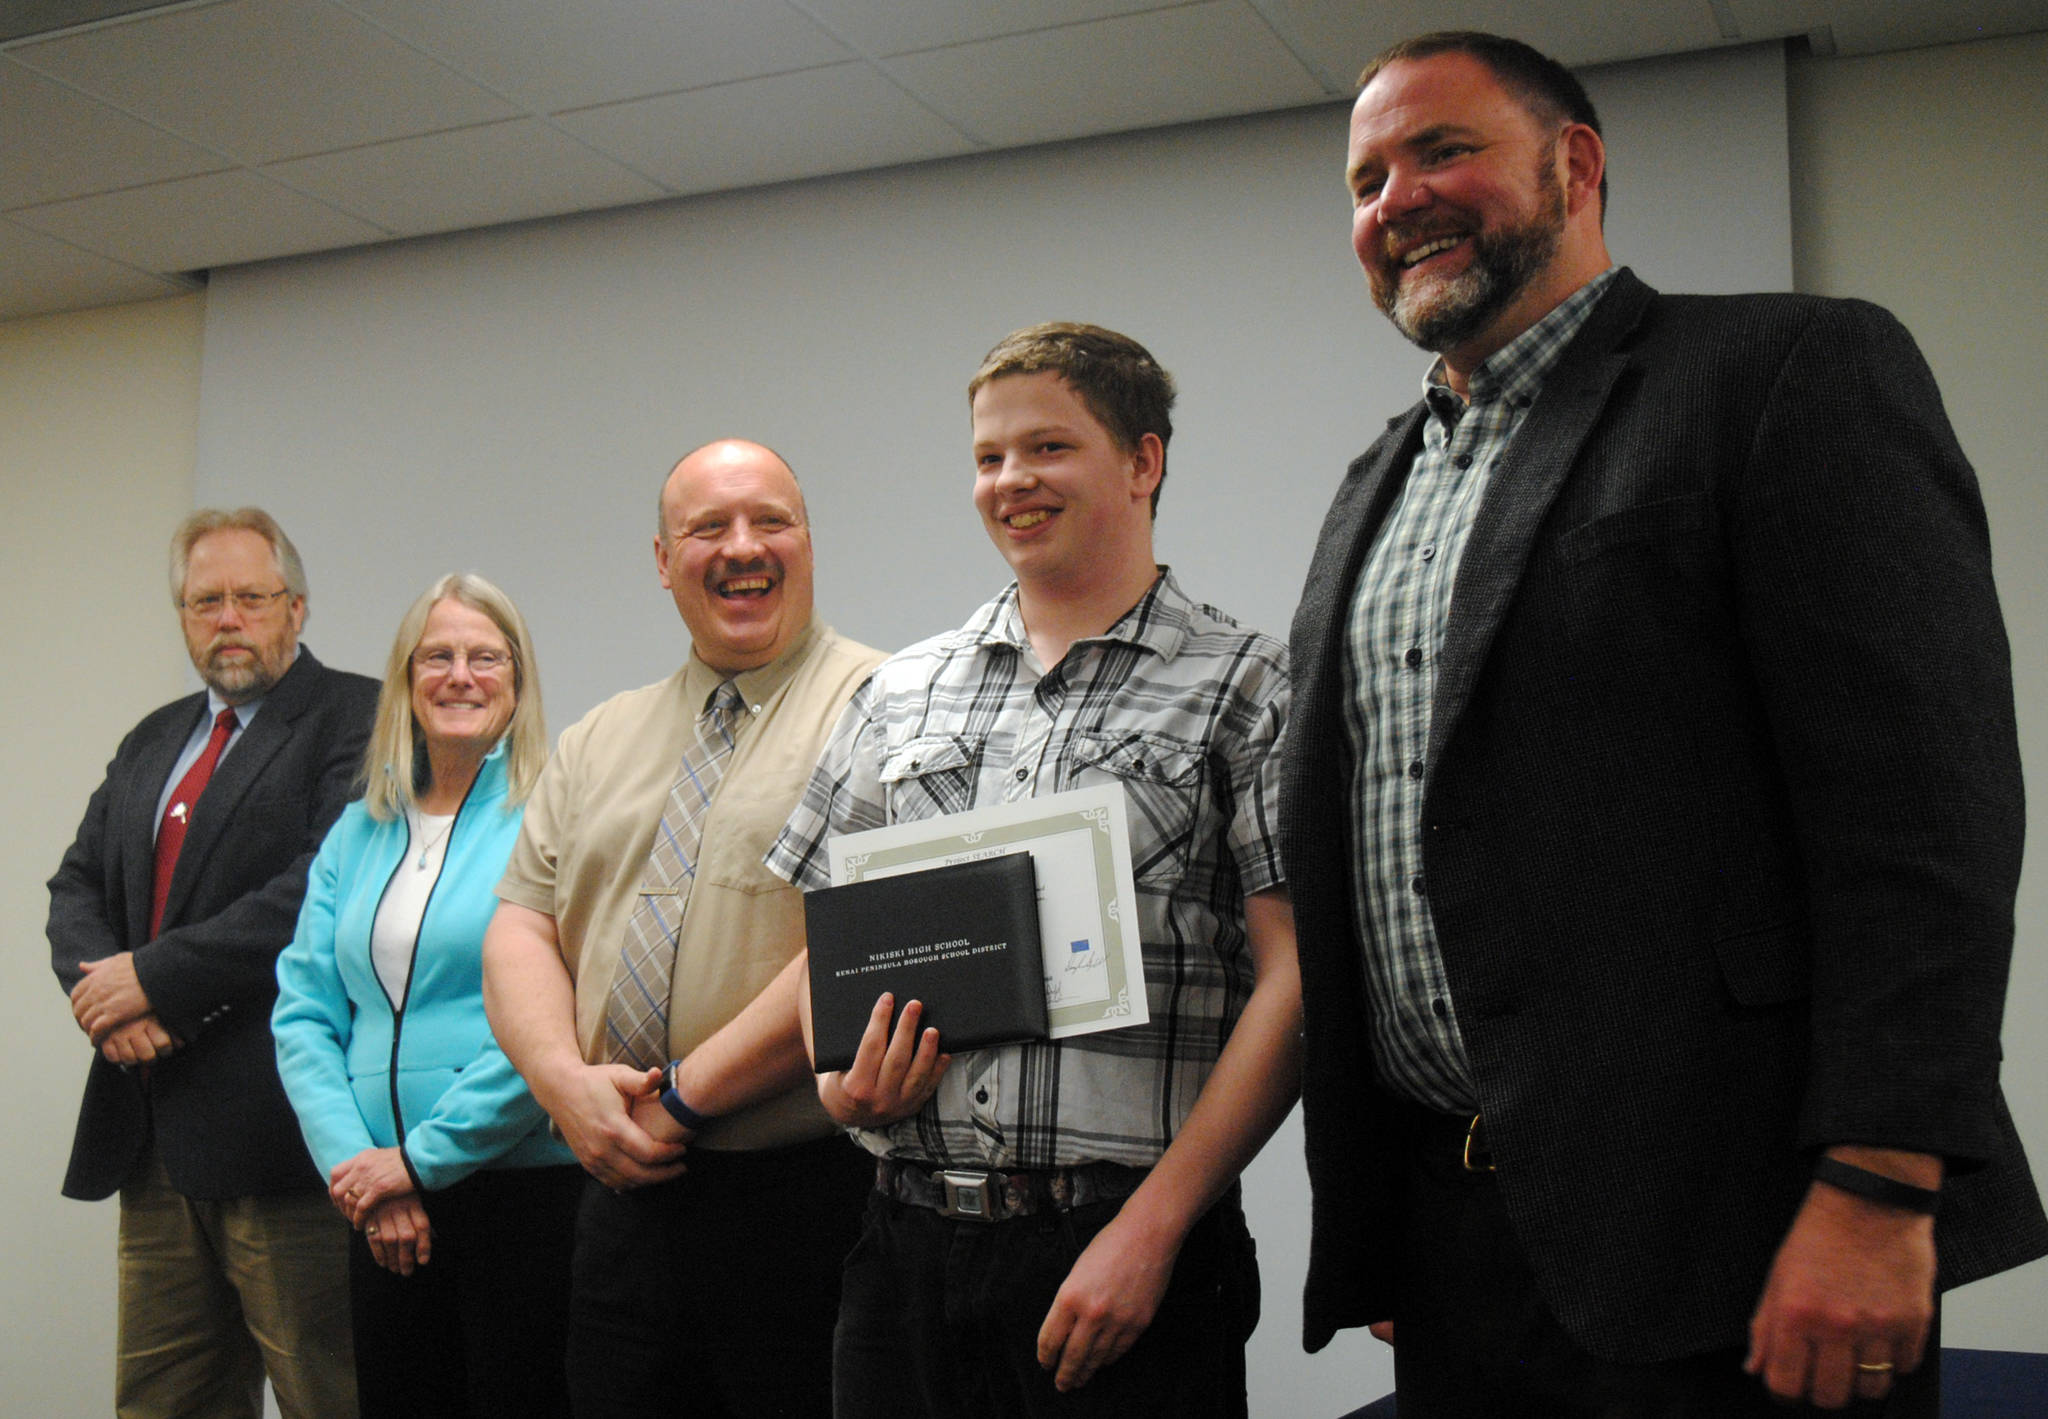 Nikiski High School student Justin Mason, with diploma, poses for a photo at his graduation from Project SEARCH flanked by (left from right) Kenai Peninsula Borough School District Assistant Superintendent Dave Jones, Board of Education member Penny Vadla, Superintendent Sean Dusek and Pupil Services Director Clayton Holland, Monday, May 16, 2017 at Central Peninsula Hospital. (Kat Sorensen/Peninsula Clarion)